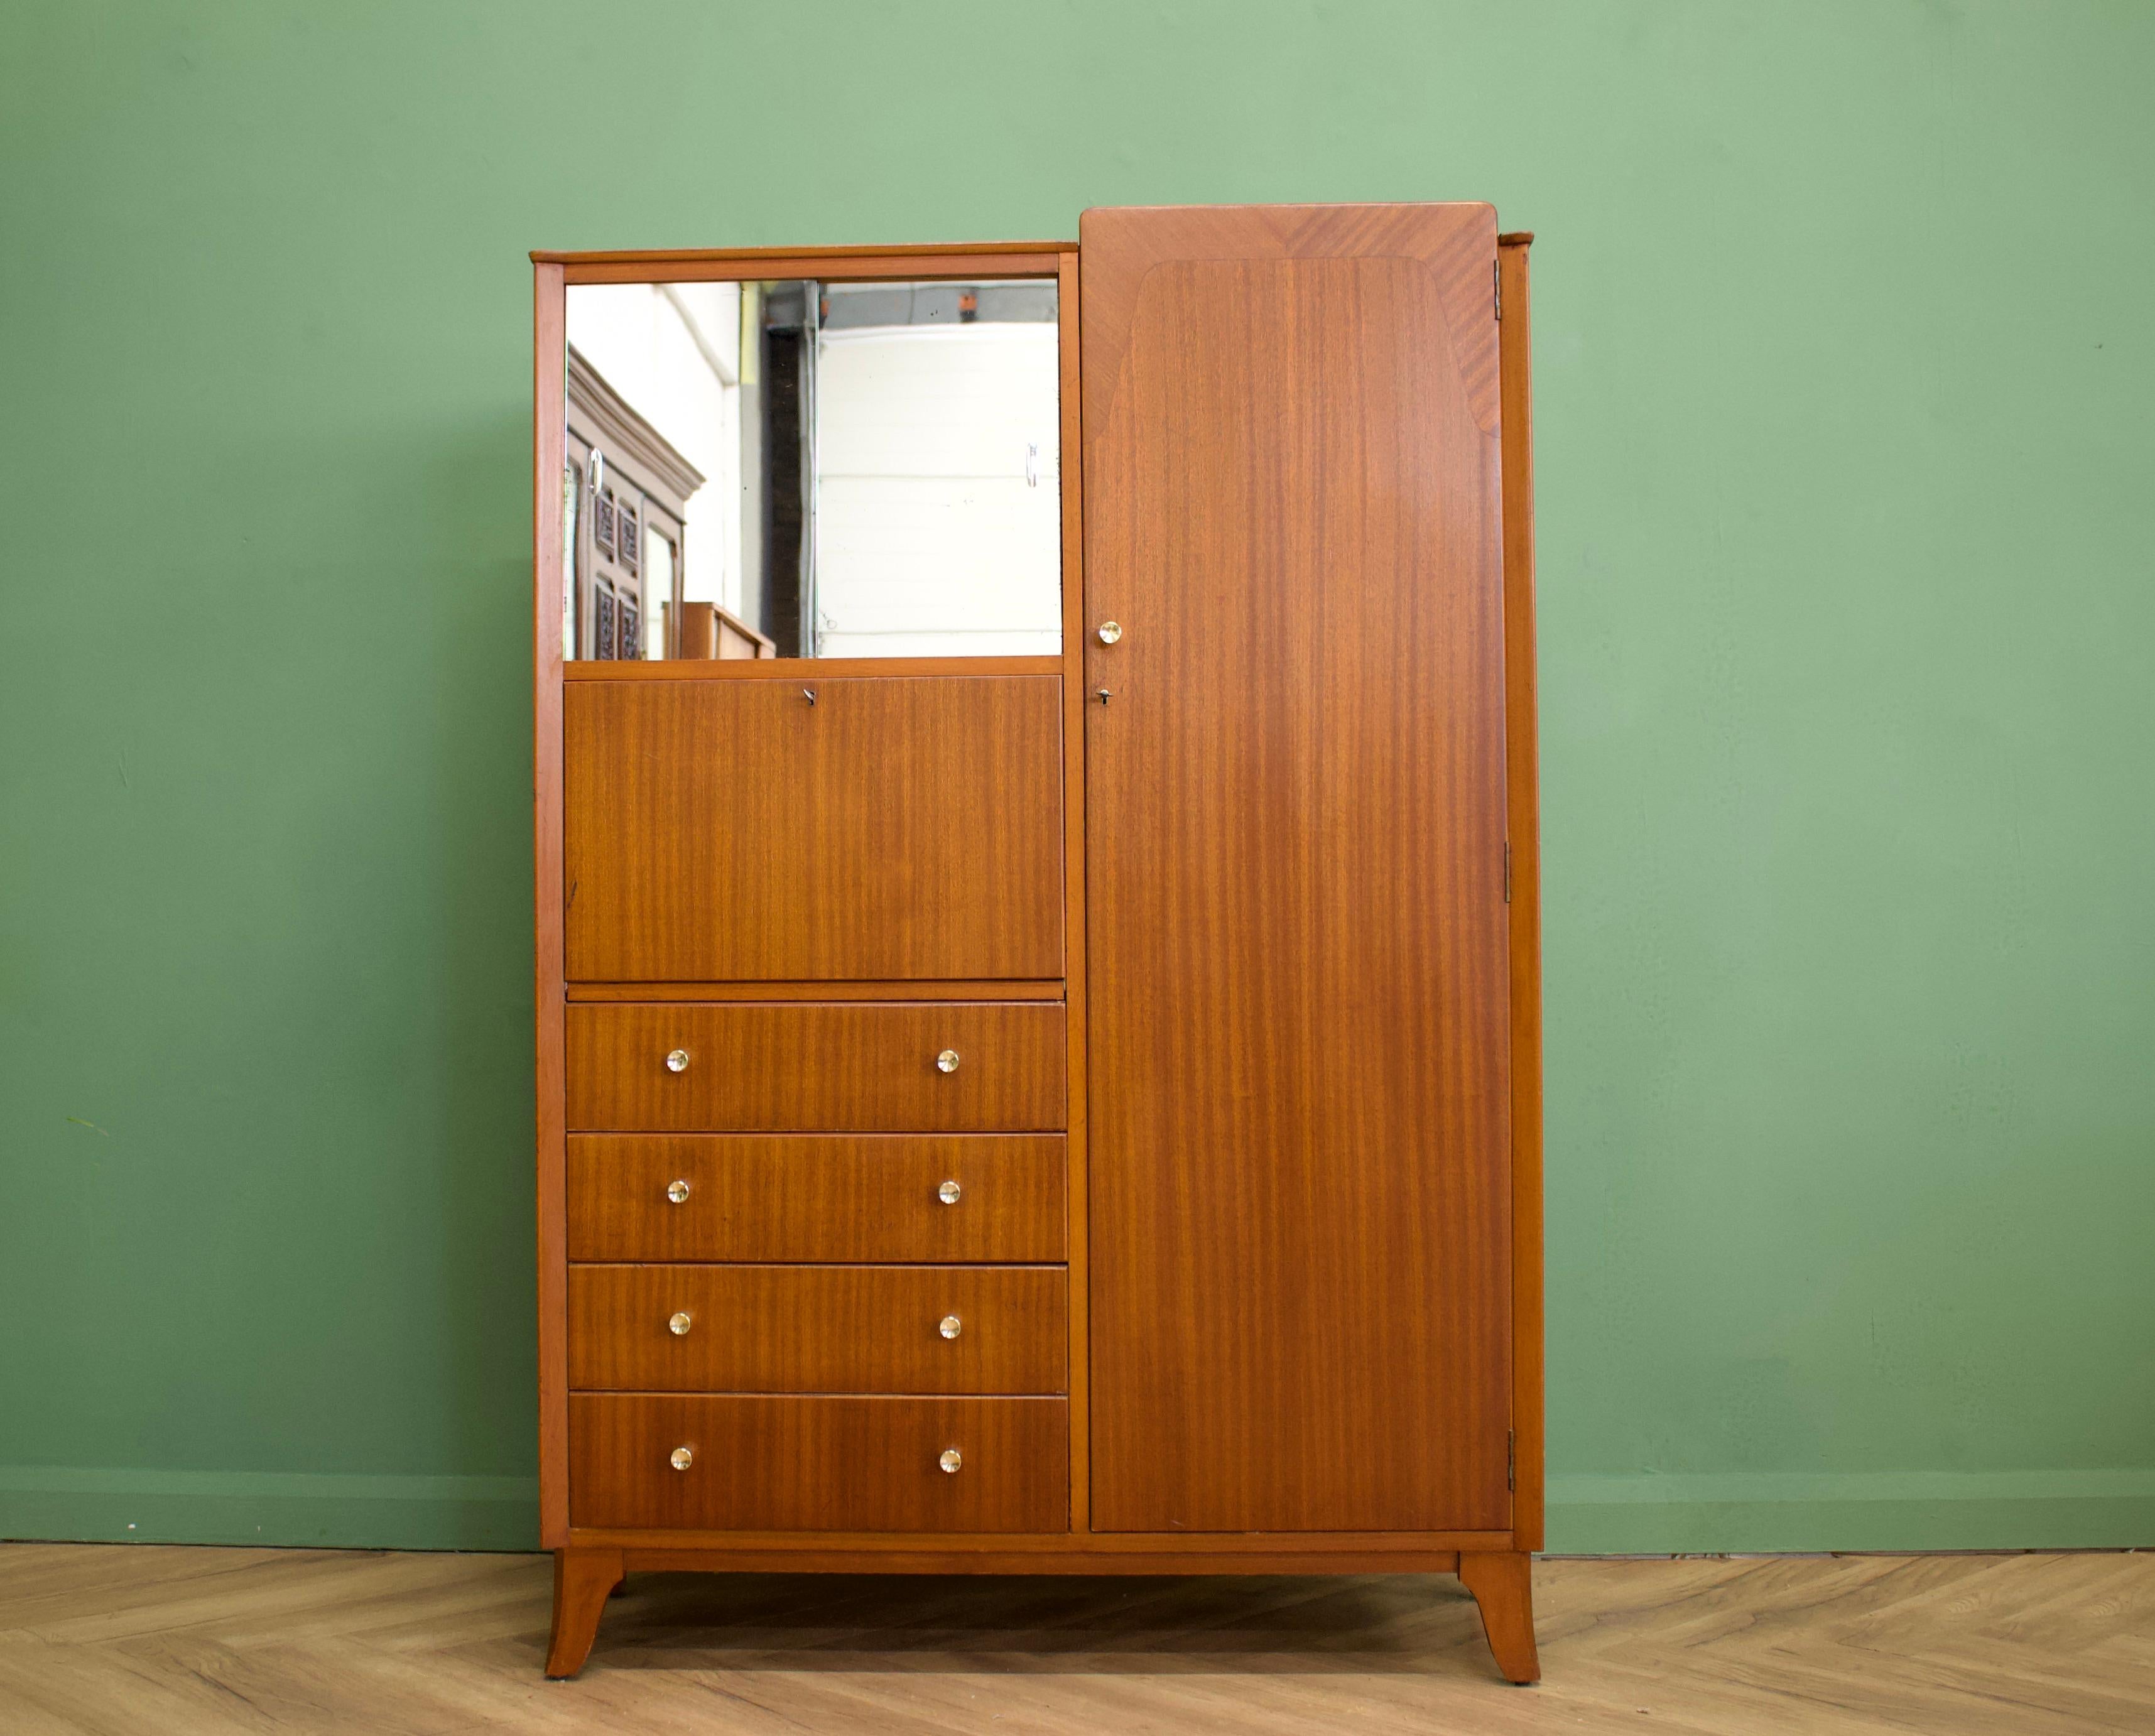 A compact teak wardrobe from Lebus.
Featuring a hanging rail, mirrored sliding door compartment, a drop down door cabinet and four drawers
Two doors are lockable.
The handles are solid brass.
This piece could be used as a hall storage